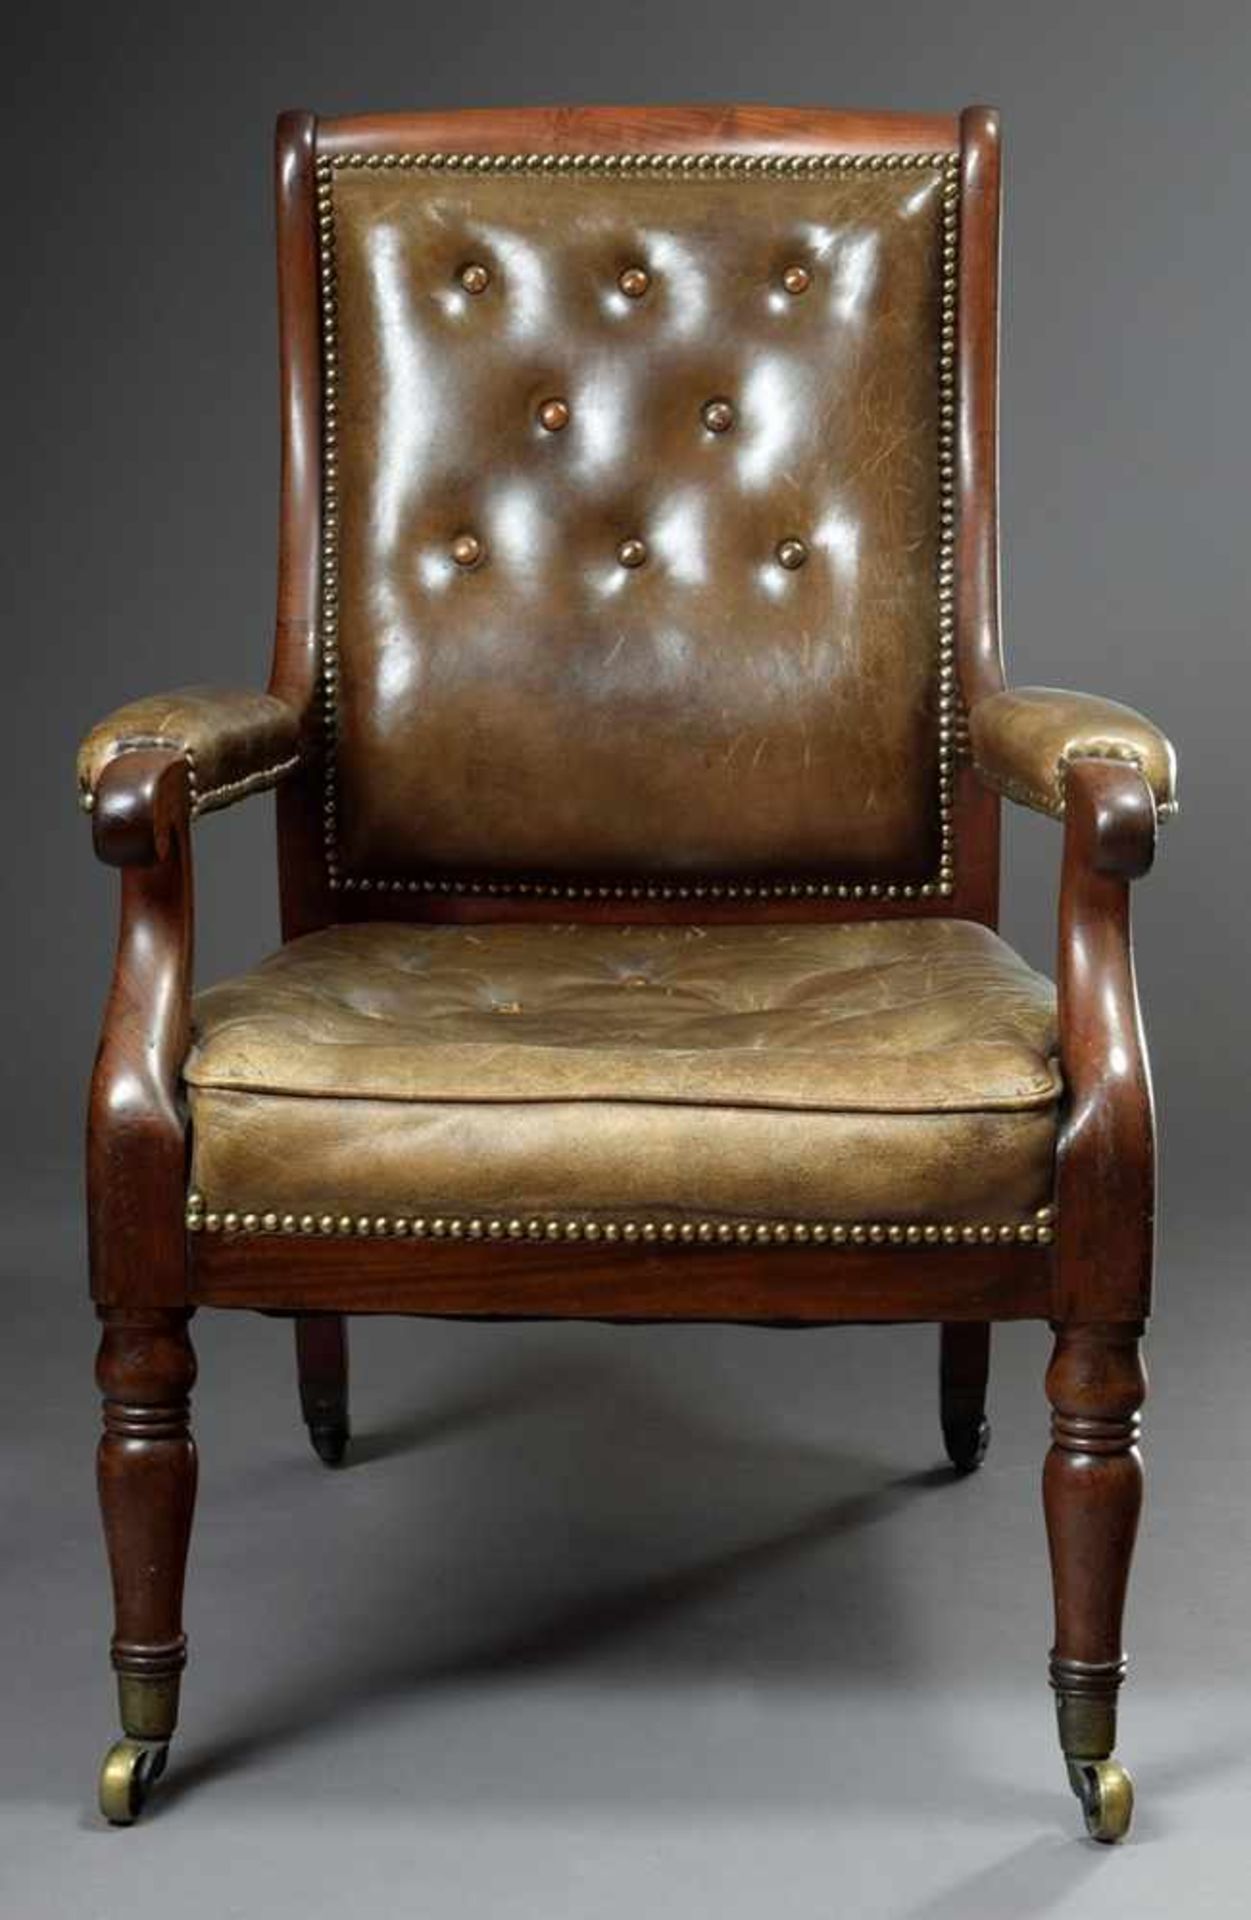 English mahogany desk chair with armrests and green leather upholstery, 2nd half 19th century, h.